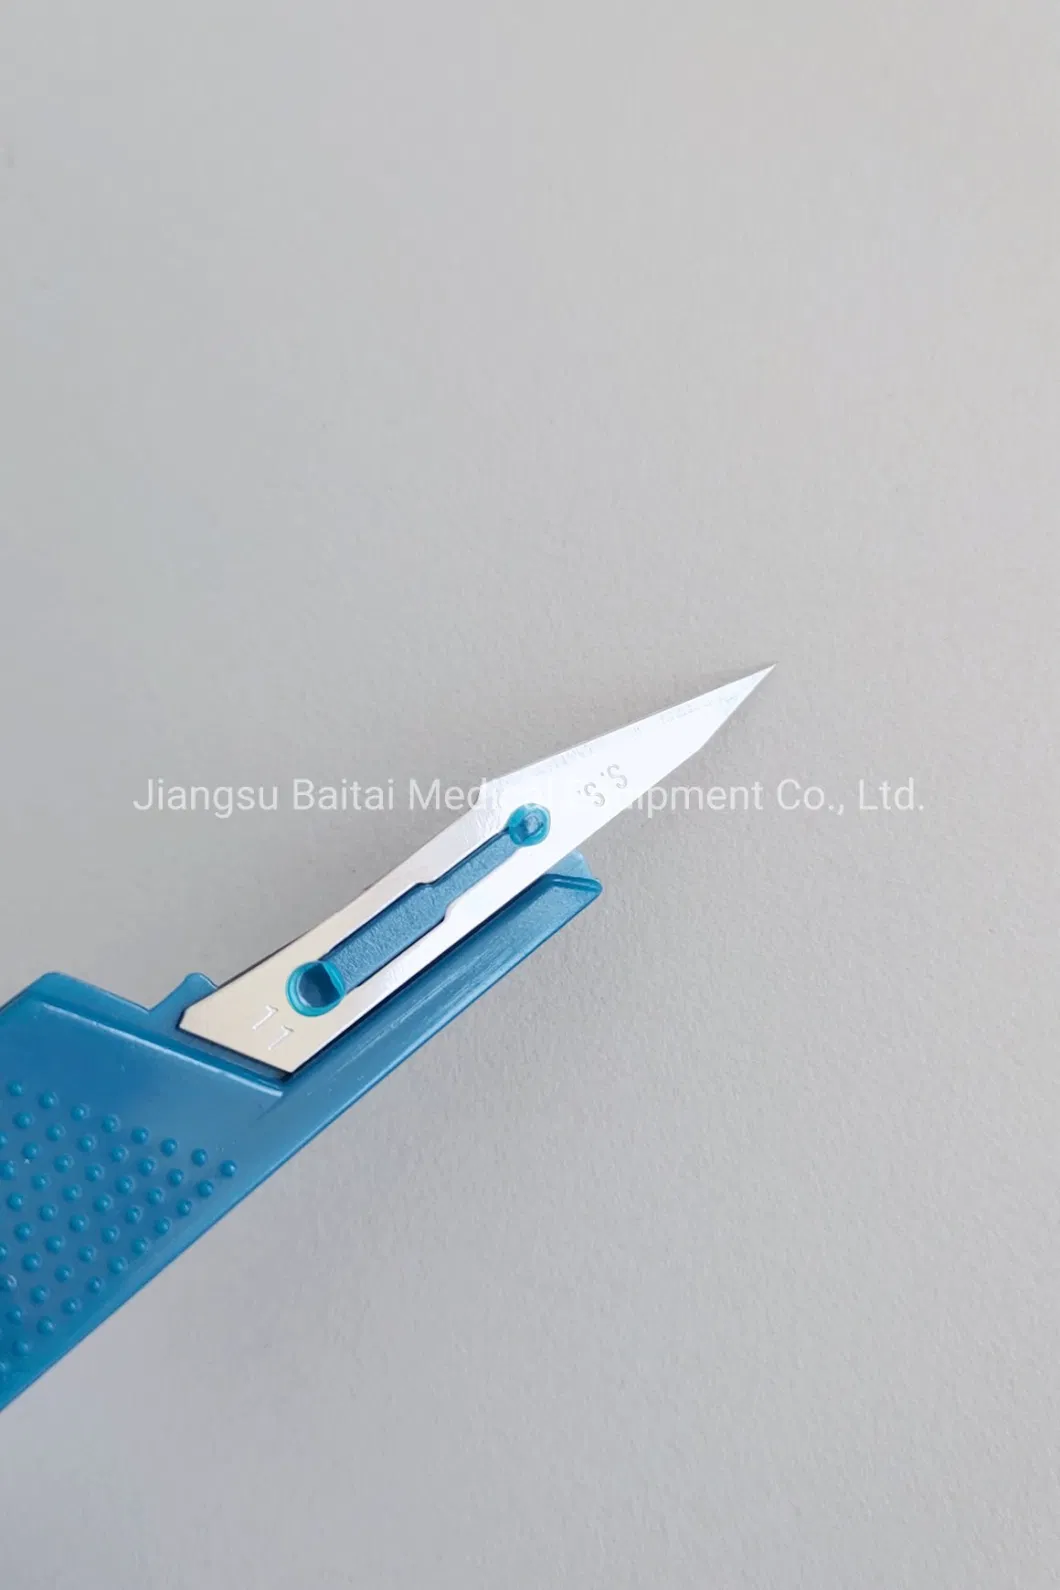 Stainless Steel Surgical Safety Scalpel with Plastic Handle